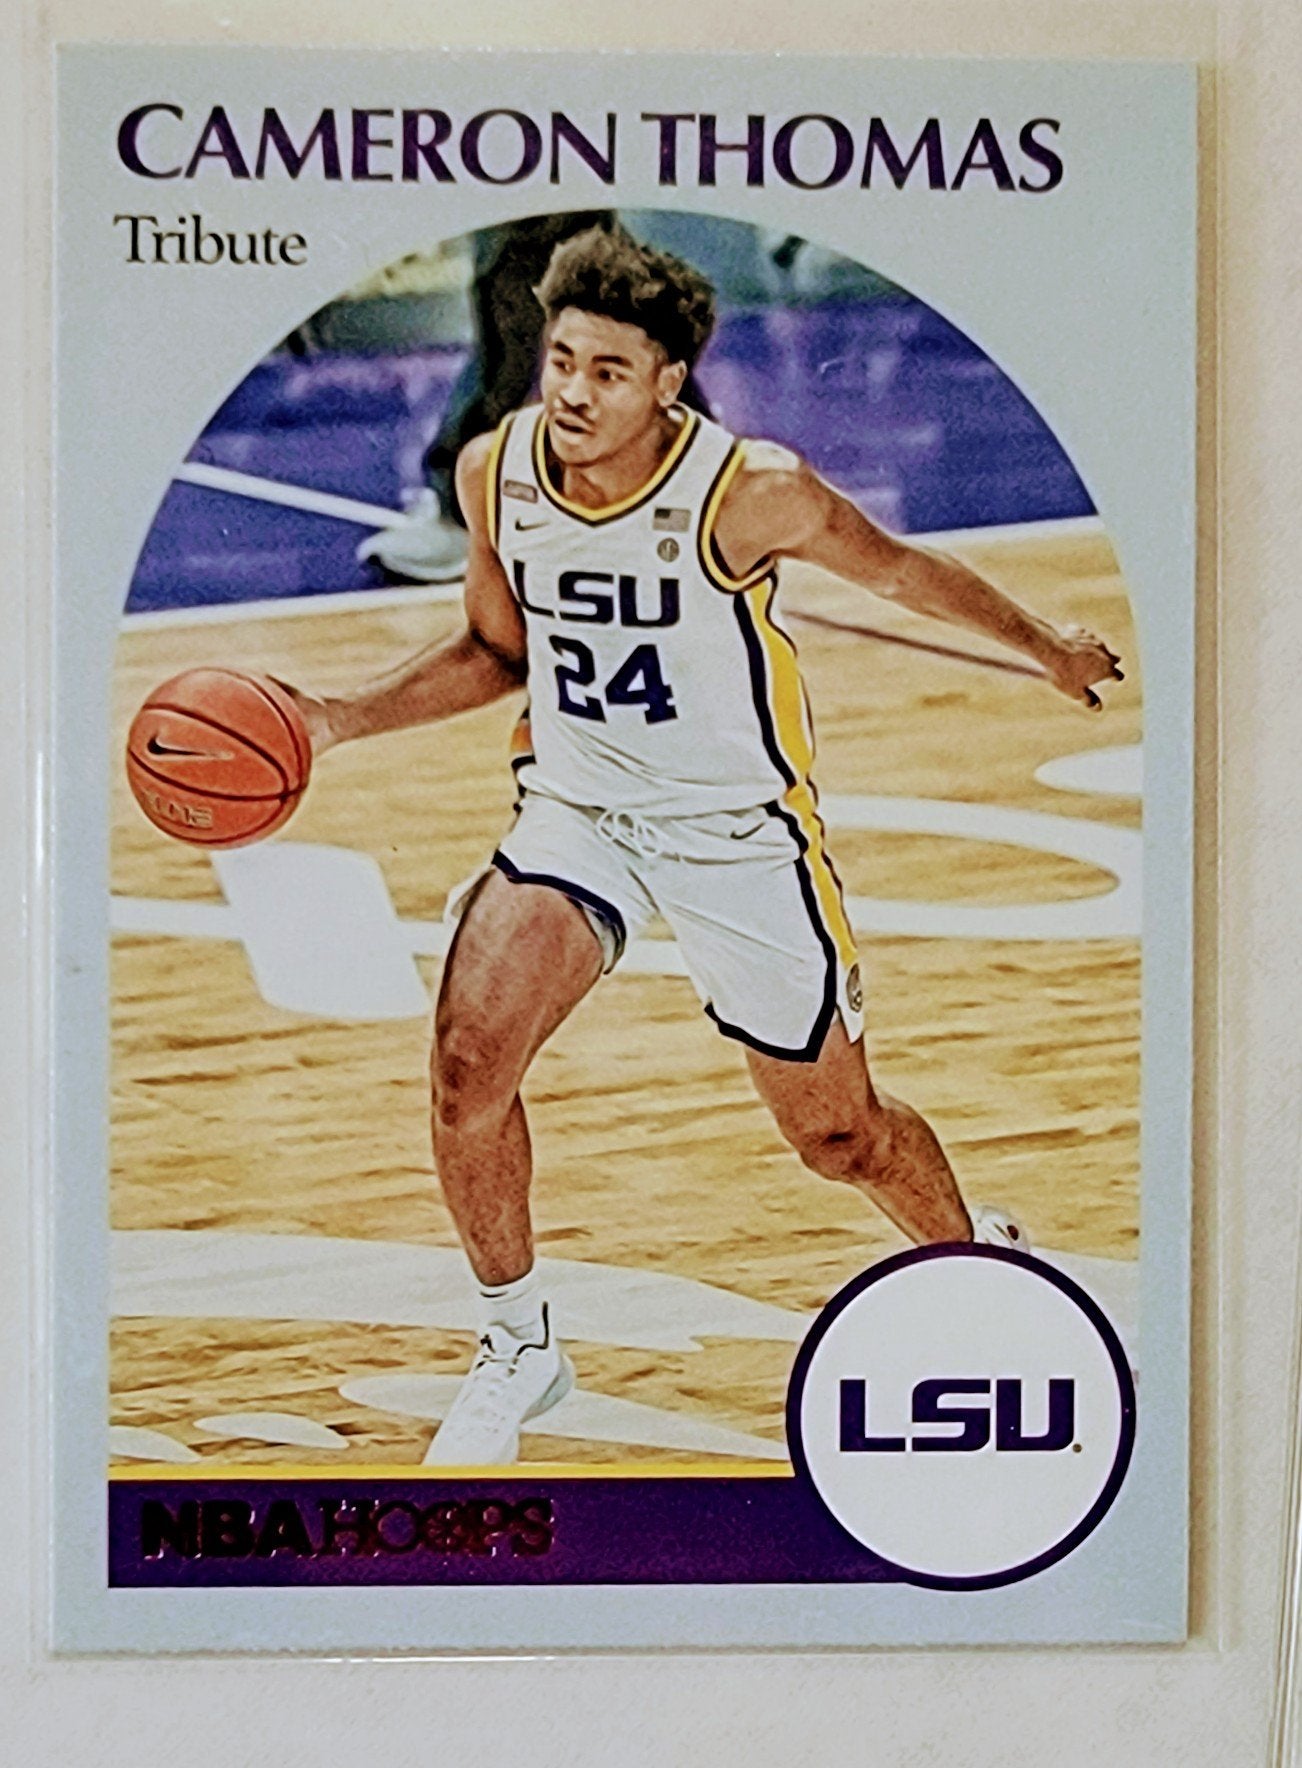 2021 Panini Chronicles Draft Picks Cameron Thomas Purple Tribute Rookie Basketball Card AVM1 simple Xclusive Collectibles   